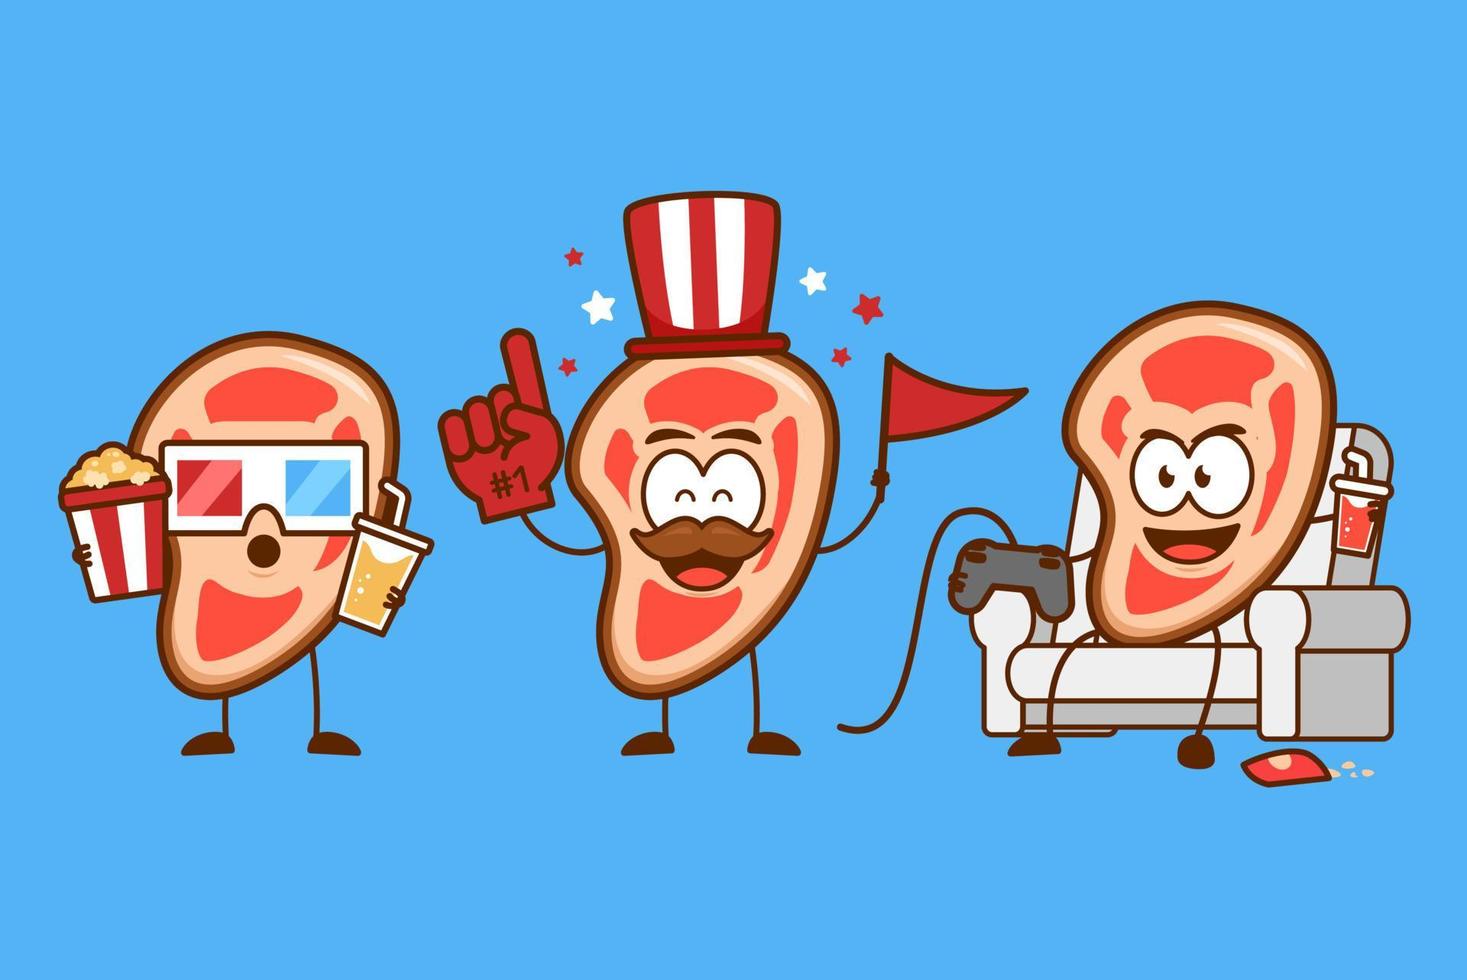 Cute funny raw meat steak cartoon character mascot entertainment activity set as movie watcher, sports supporter, and playing video games vector